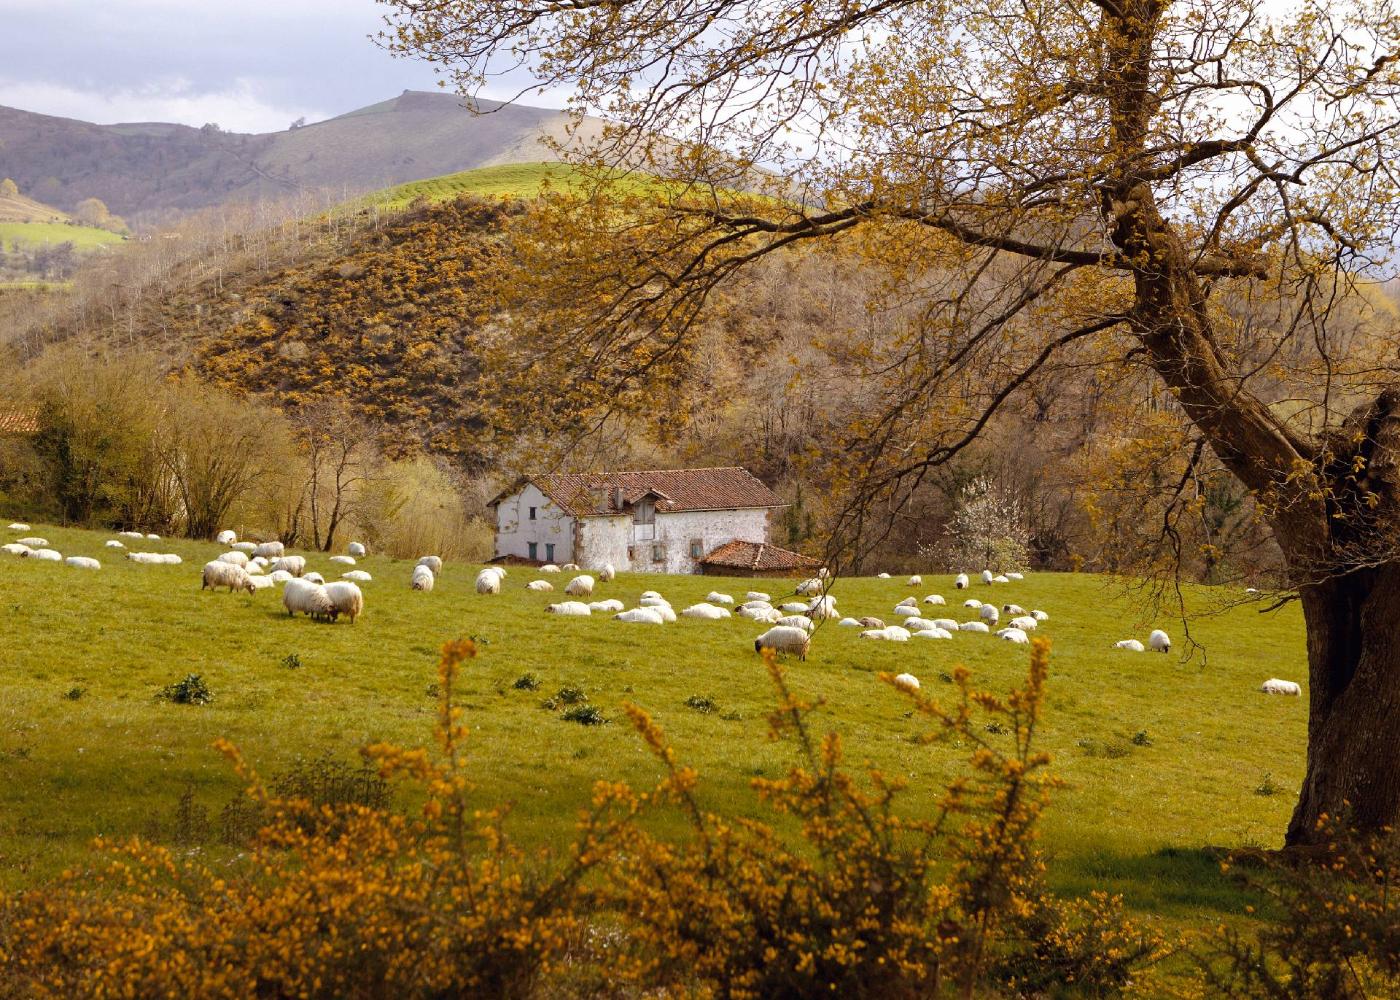 Landscape with sheep in the town of Arizkun